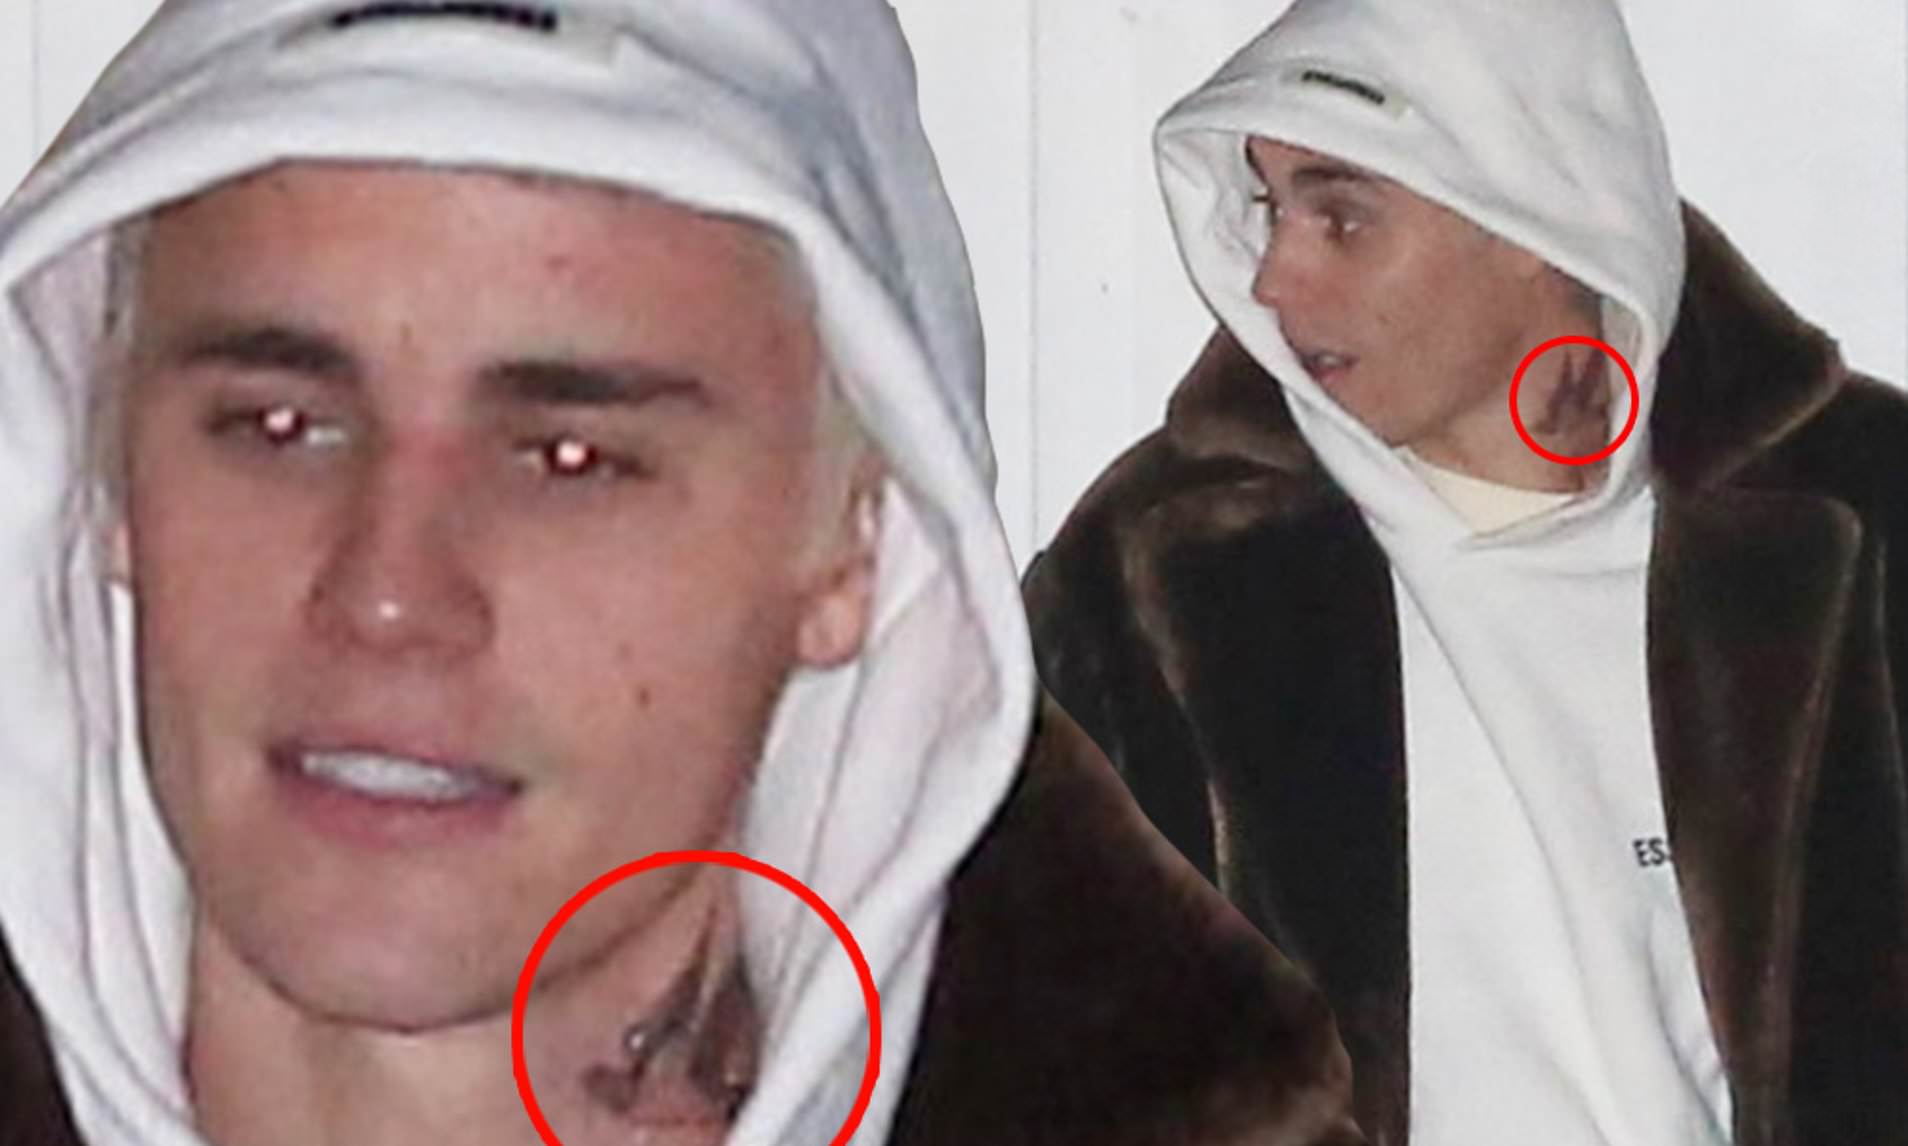 Justin Bieber unveils new neck tattoo of a large bird as he leaves church with wife Hailey